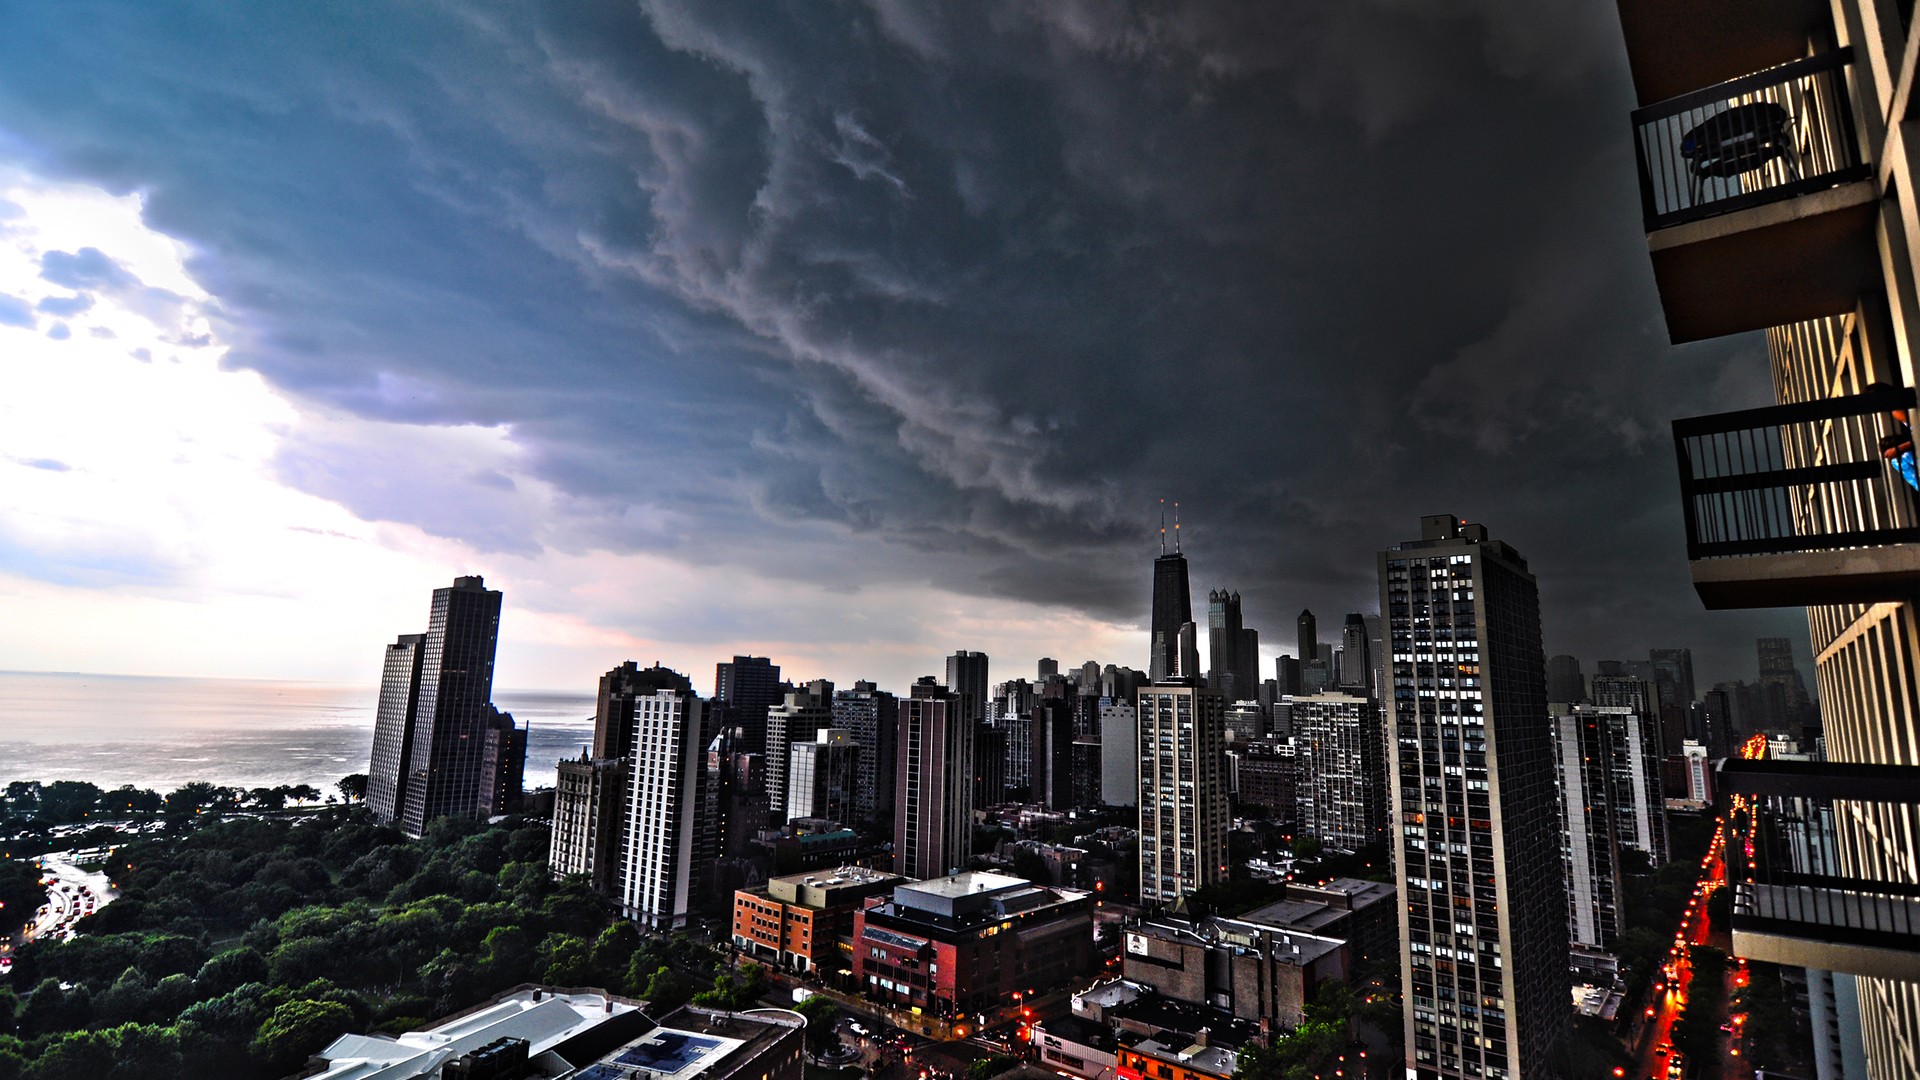 General 1920x1080 cityscape Chicago city sky clouds USA storm